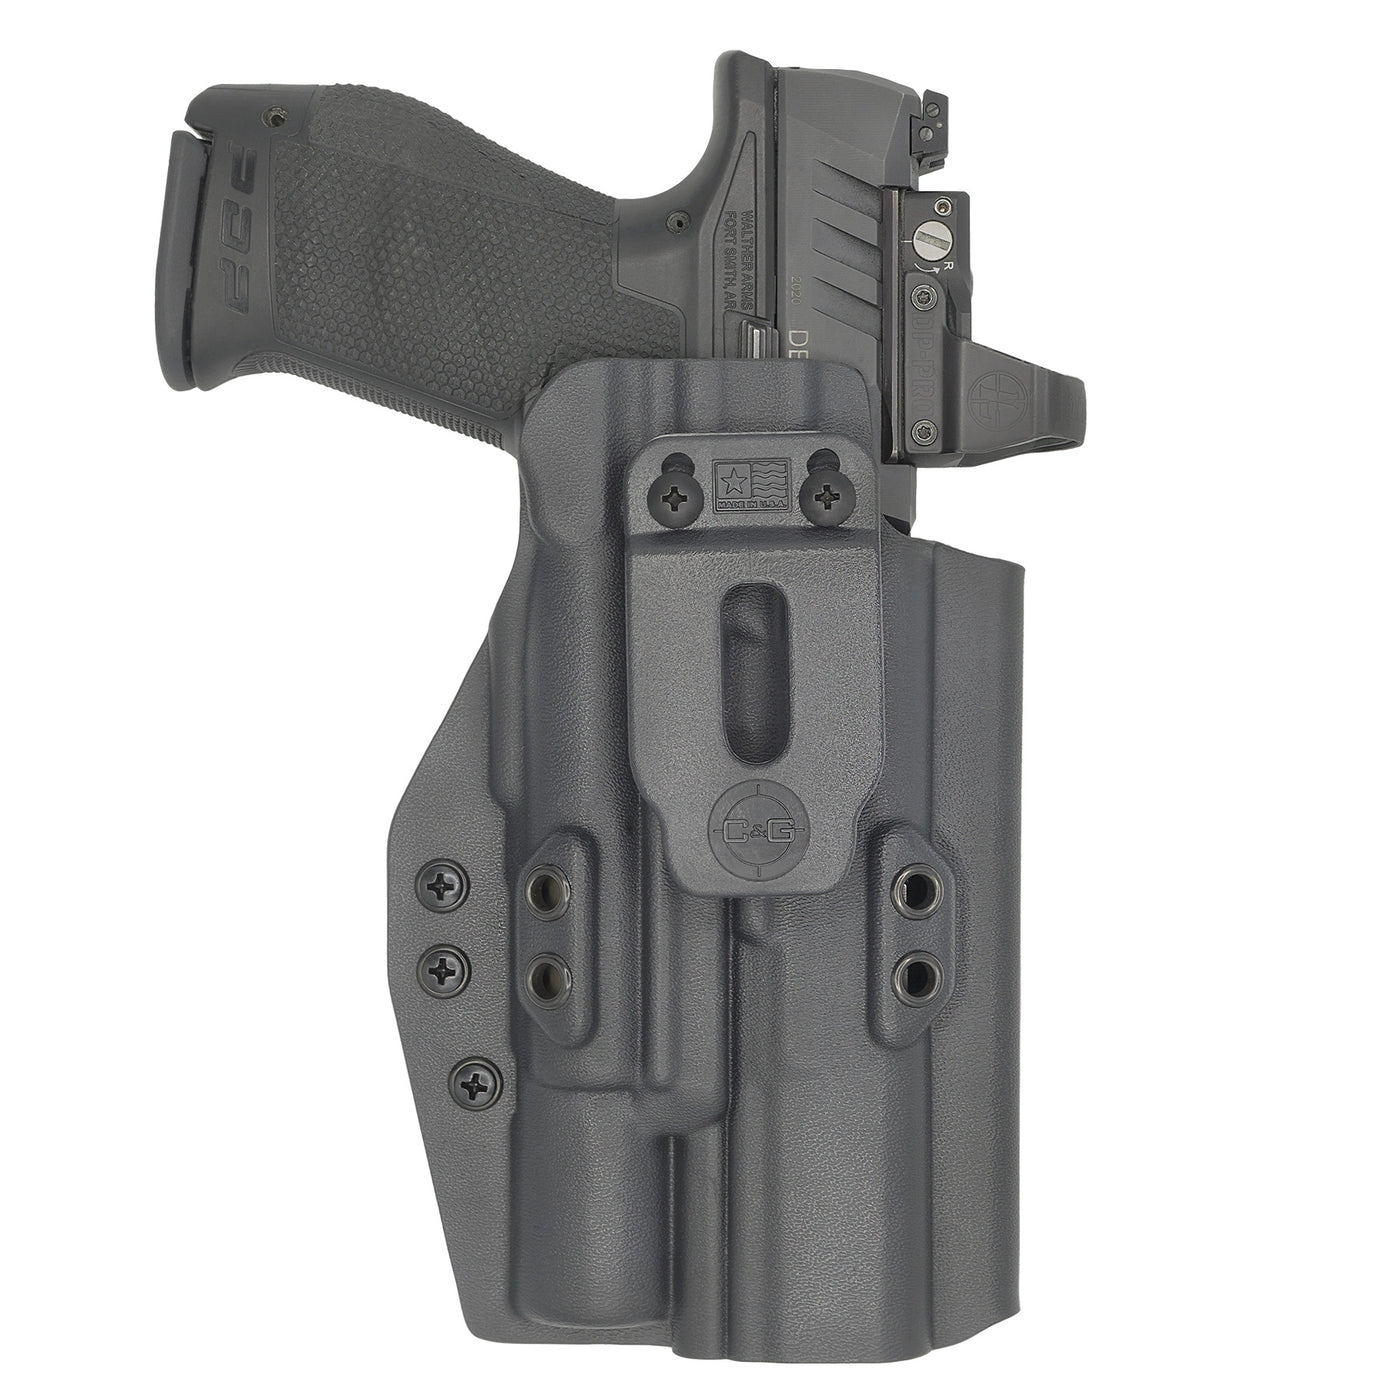 C&G Holsters custom IWB Tactical S&W M&P 9/40 Surefire X300 in holstered position